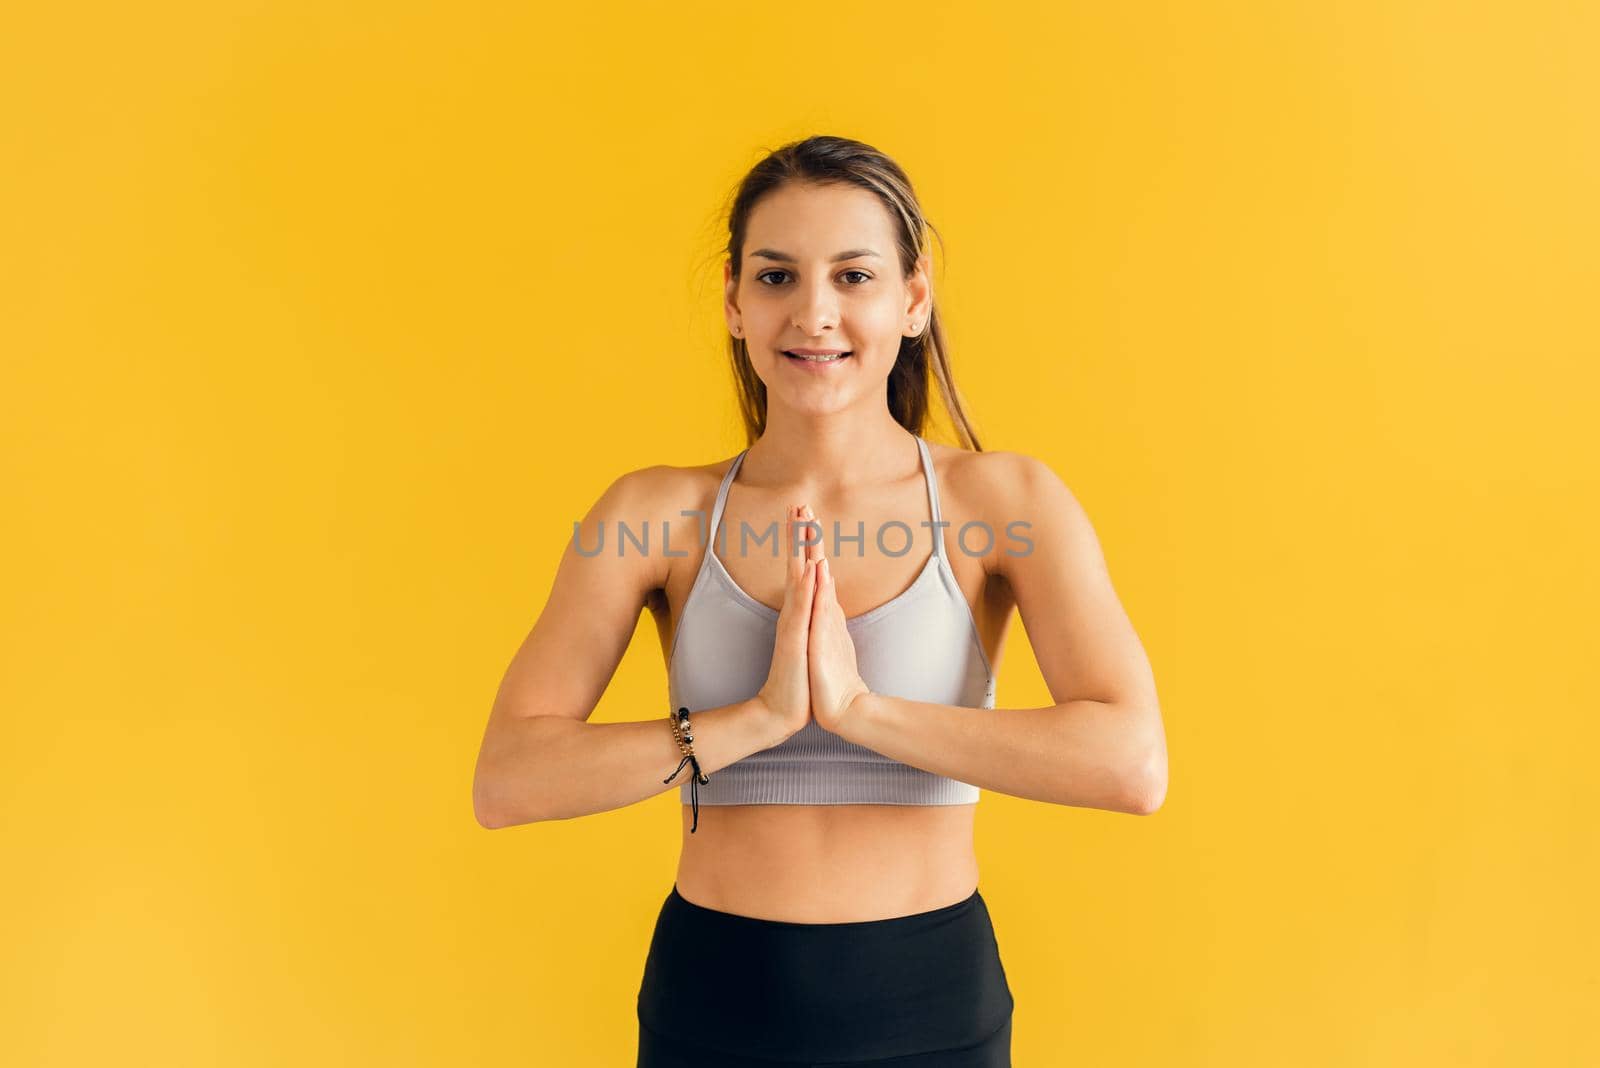 Concentrated young woman in tight sportswear practicing yoga, holding hands in namaste gesture and meditating, relaxing, looking at camera. Woman praying and holding hands in zen on yellow background.